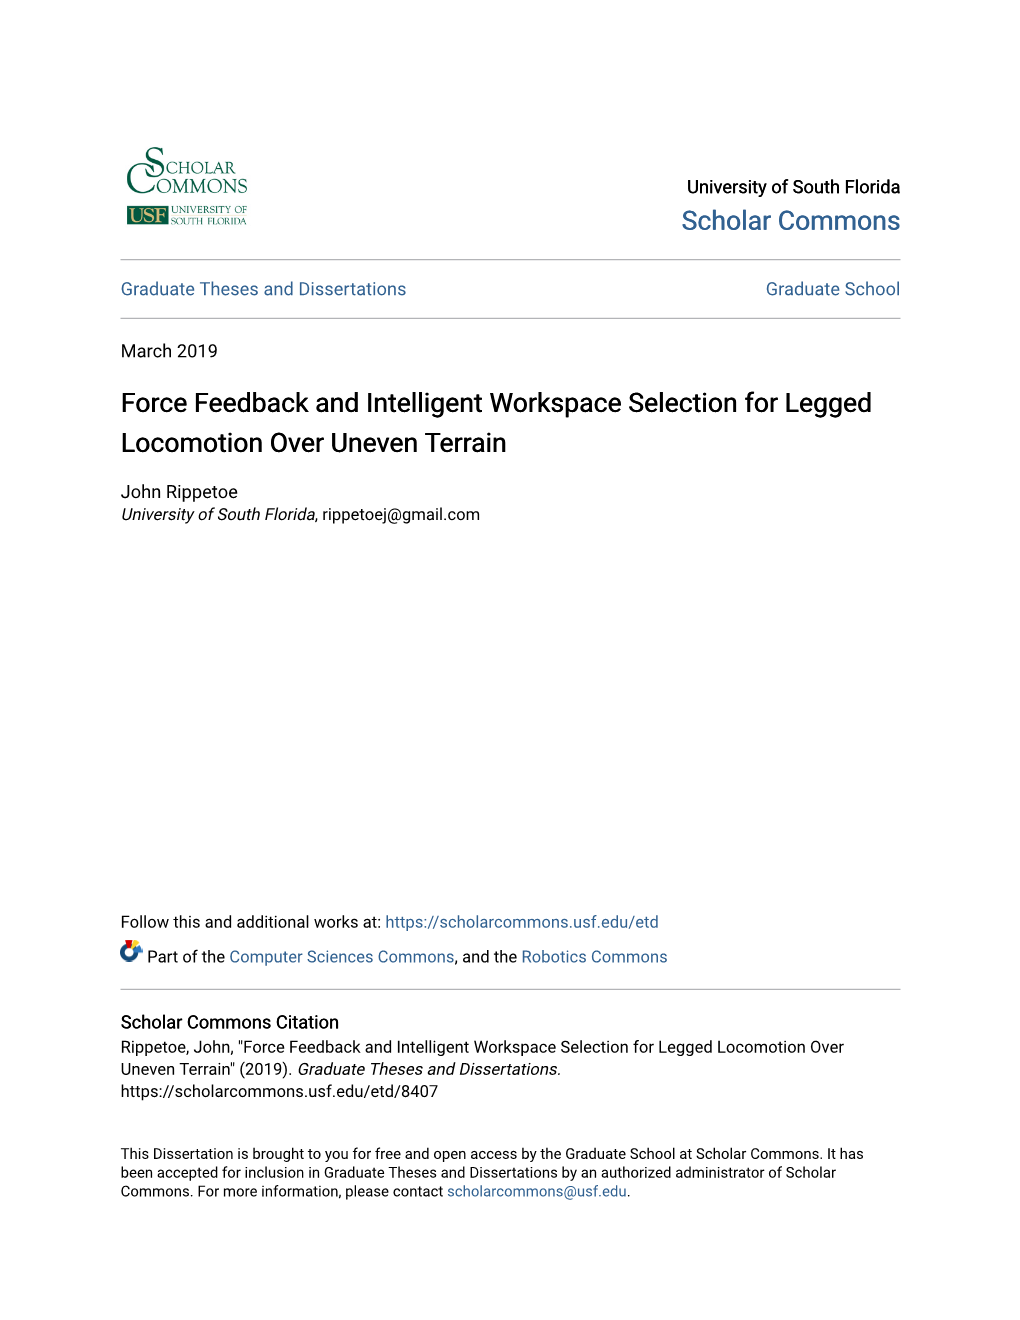 Force Feedback and Intelligent Workspace Selection for Legged Locomotion Over Uneven Terrain